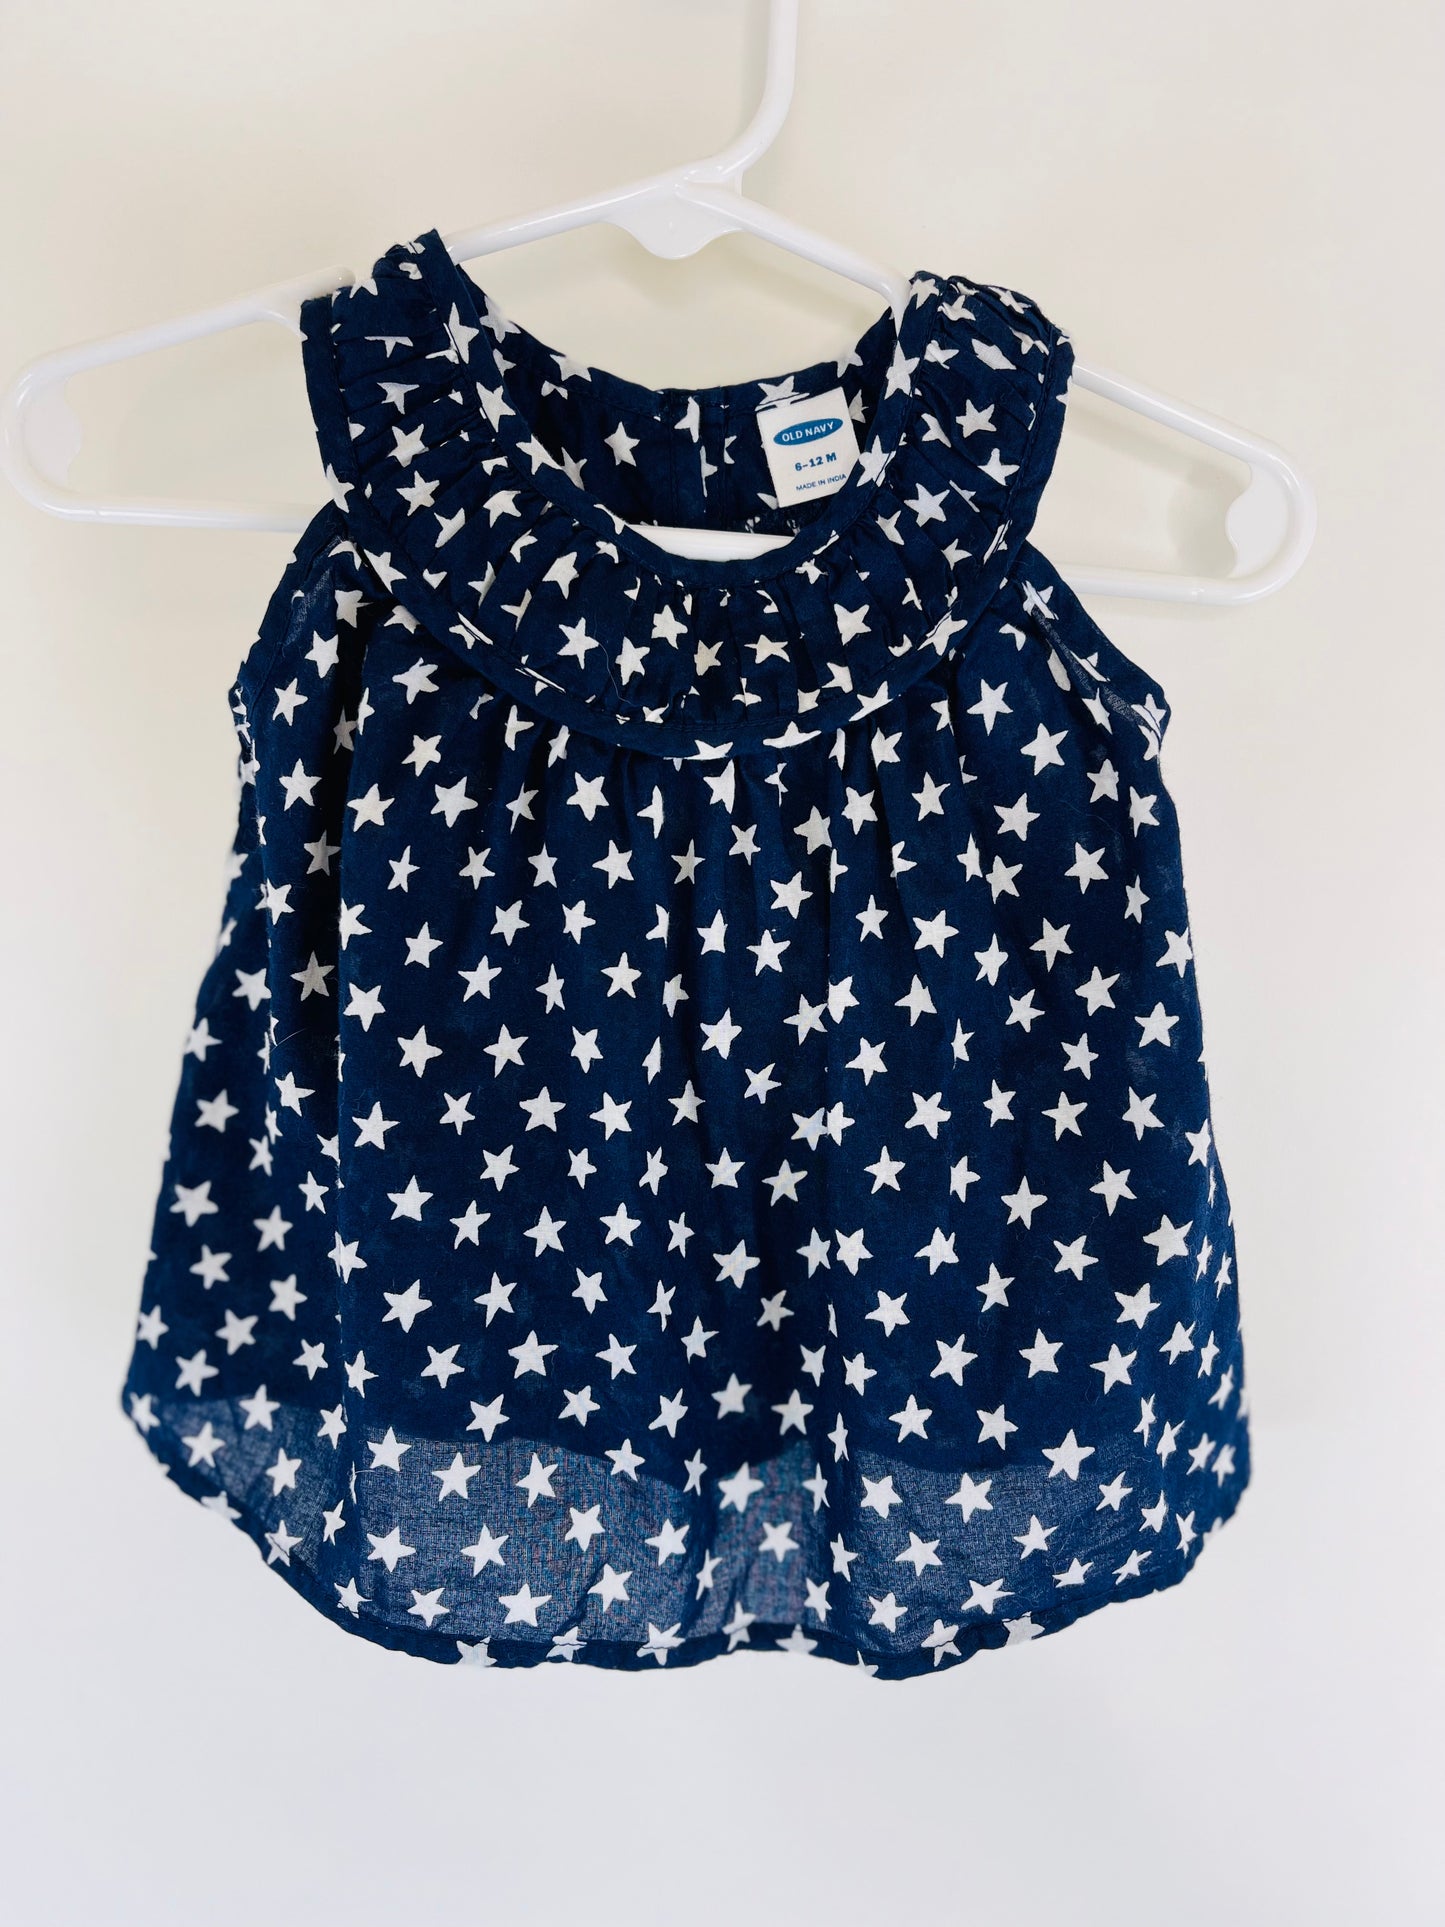 Old Navy Blue and White Stars High Neck Top - 6/12 Months